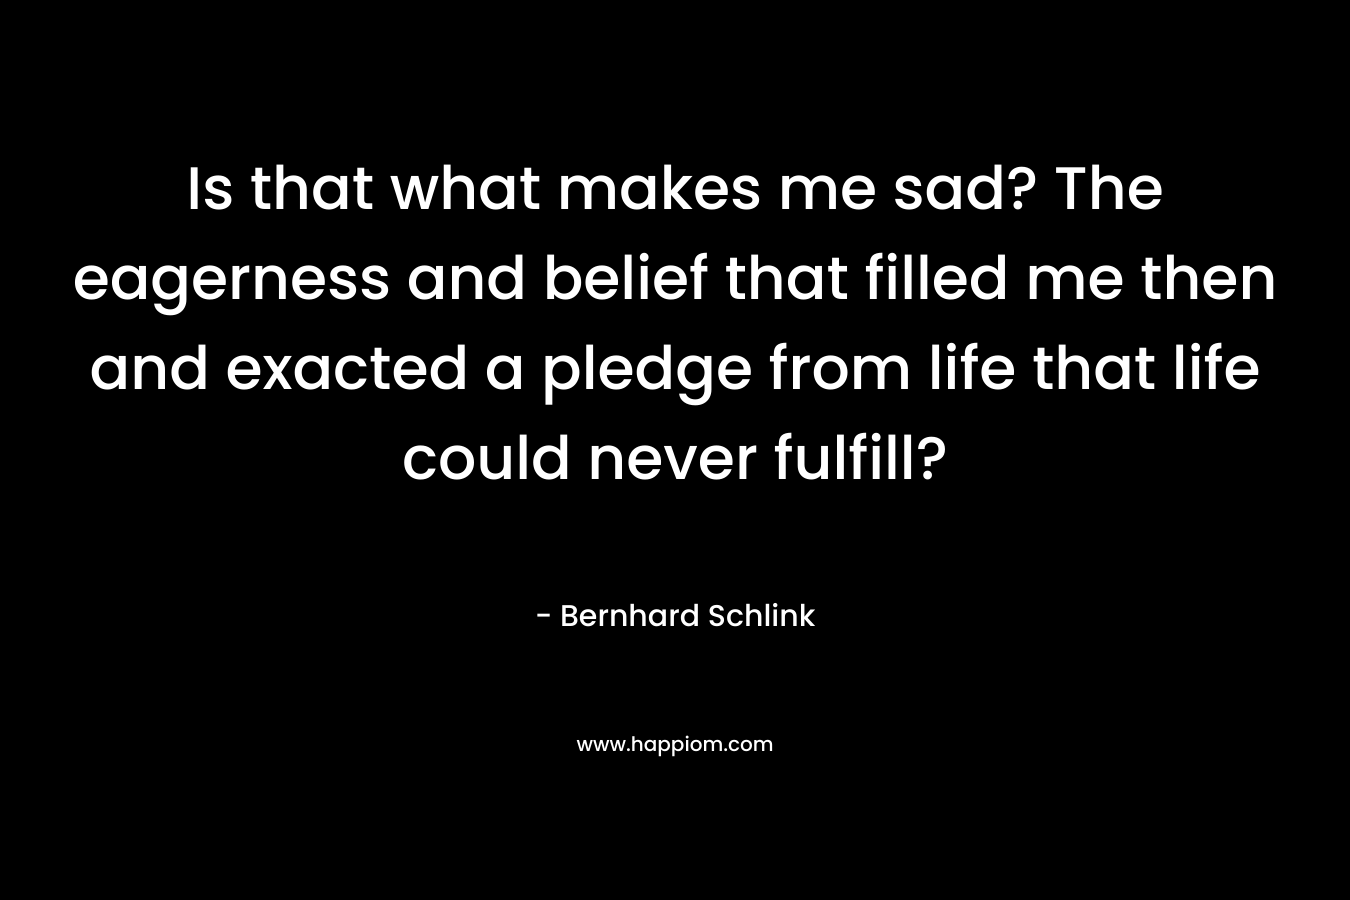 Is that what makes me sad? The eagerness and belief that filled me then and exacted a pledge from life that life could never fulfill? – Bernhard Schlink